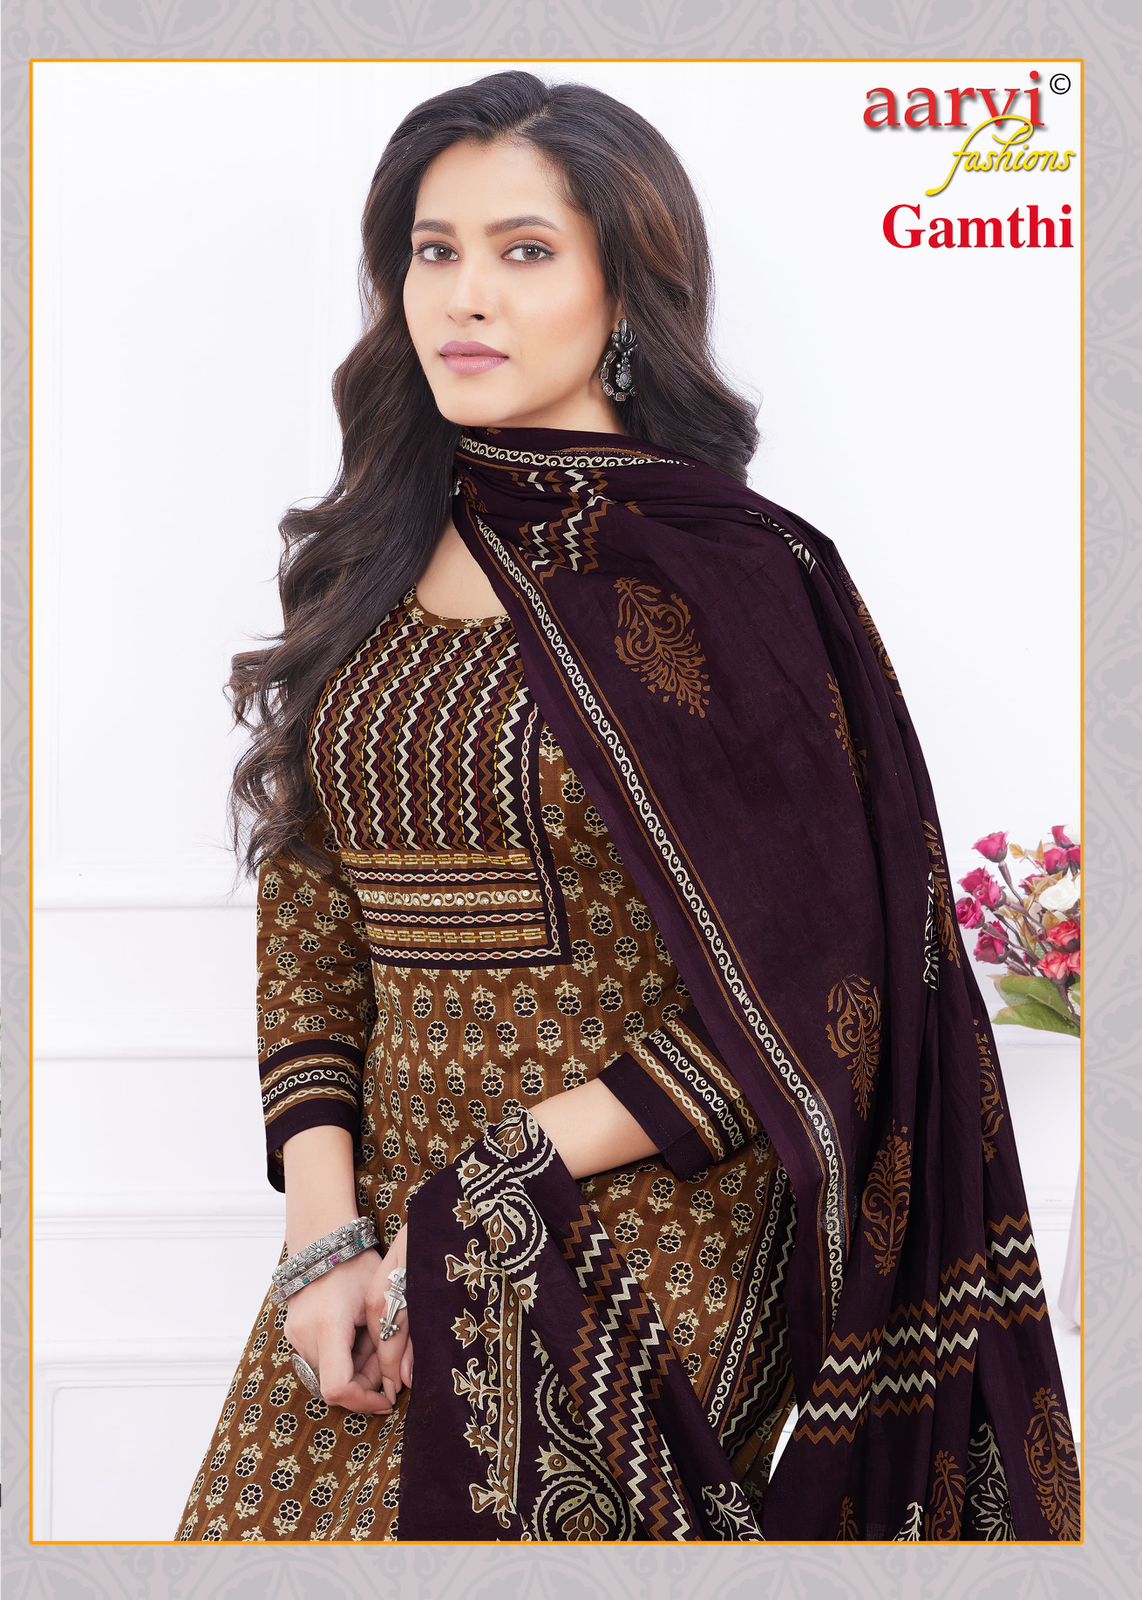 Gamthi Vol 3 Aarvi Fashions Cotton Readymade Pant Style Suits